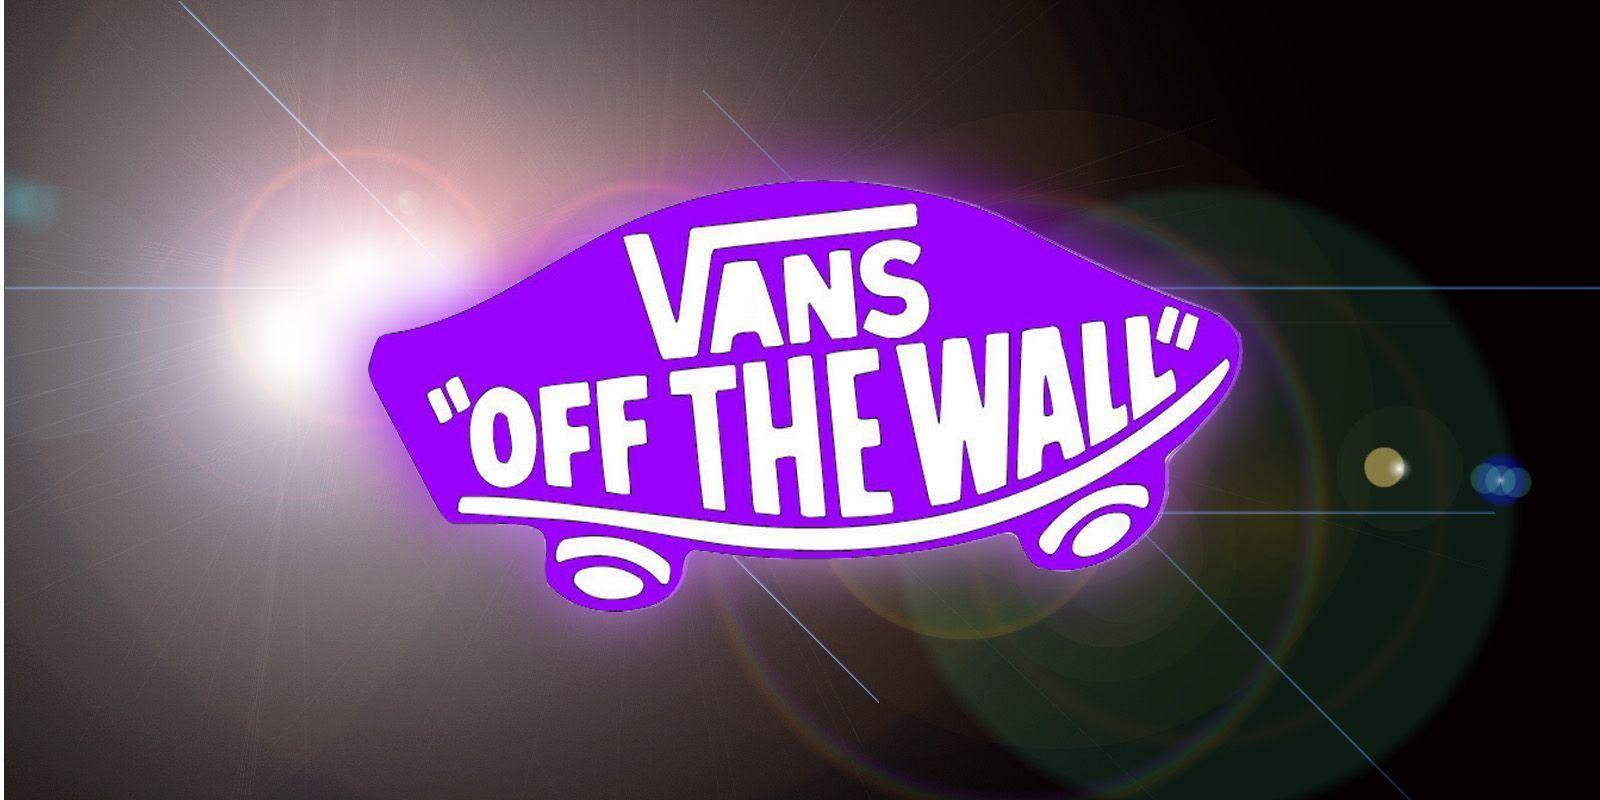 vans off the wall wallpaper 9 - Image And Wallpaper free